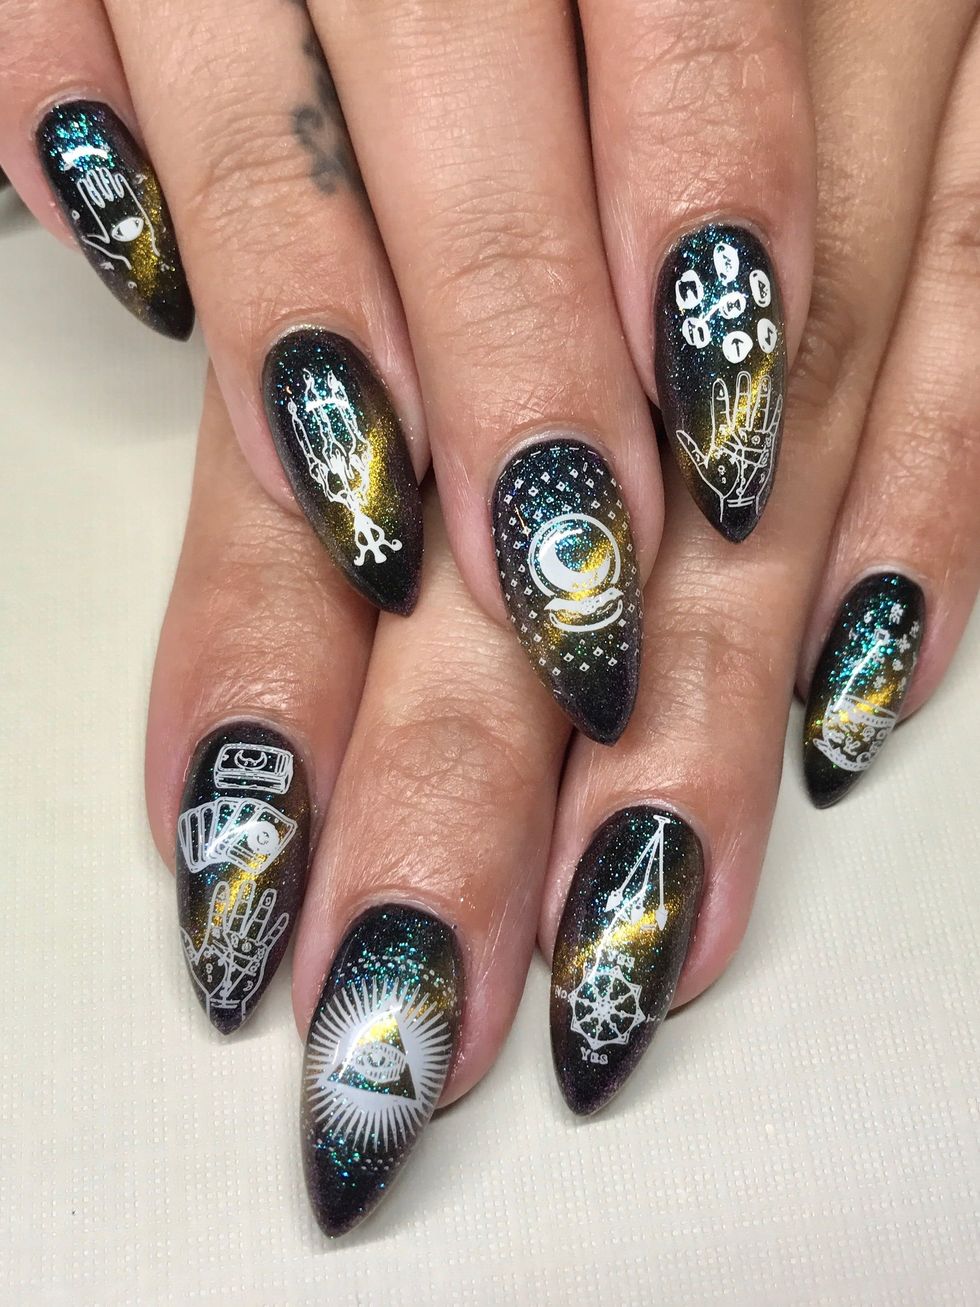 12-tarot-card-nail-art-ideas-to-round-out-your-halloween-look-brit-co